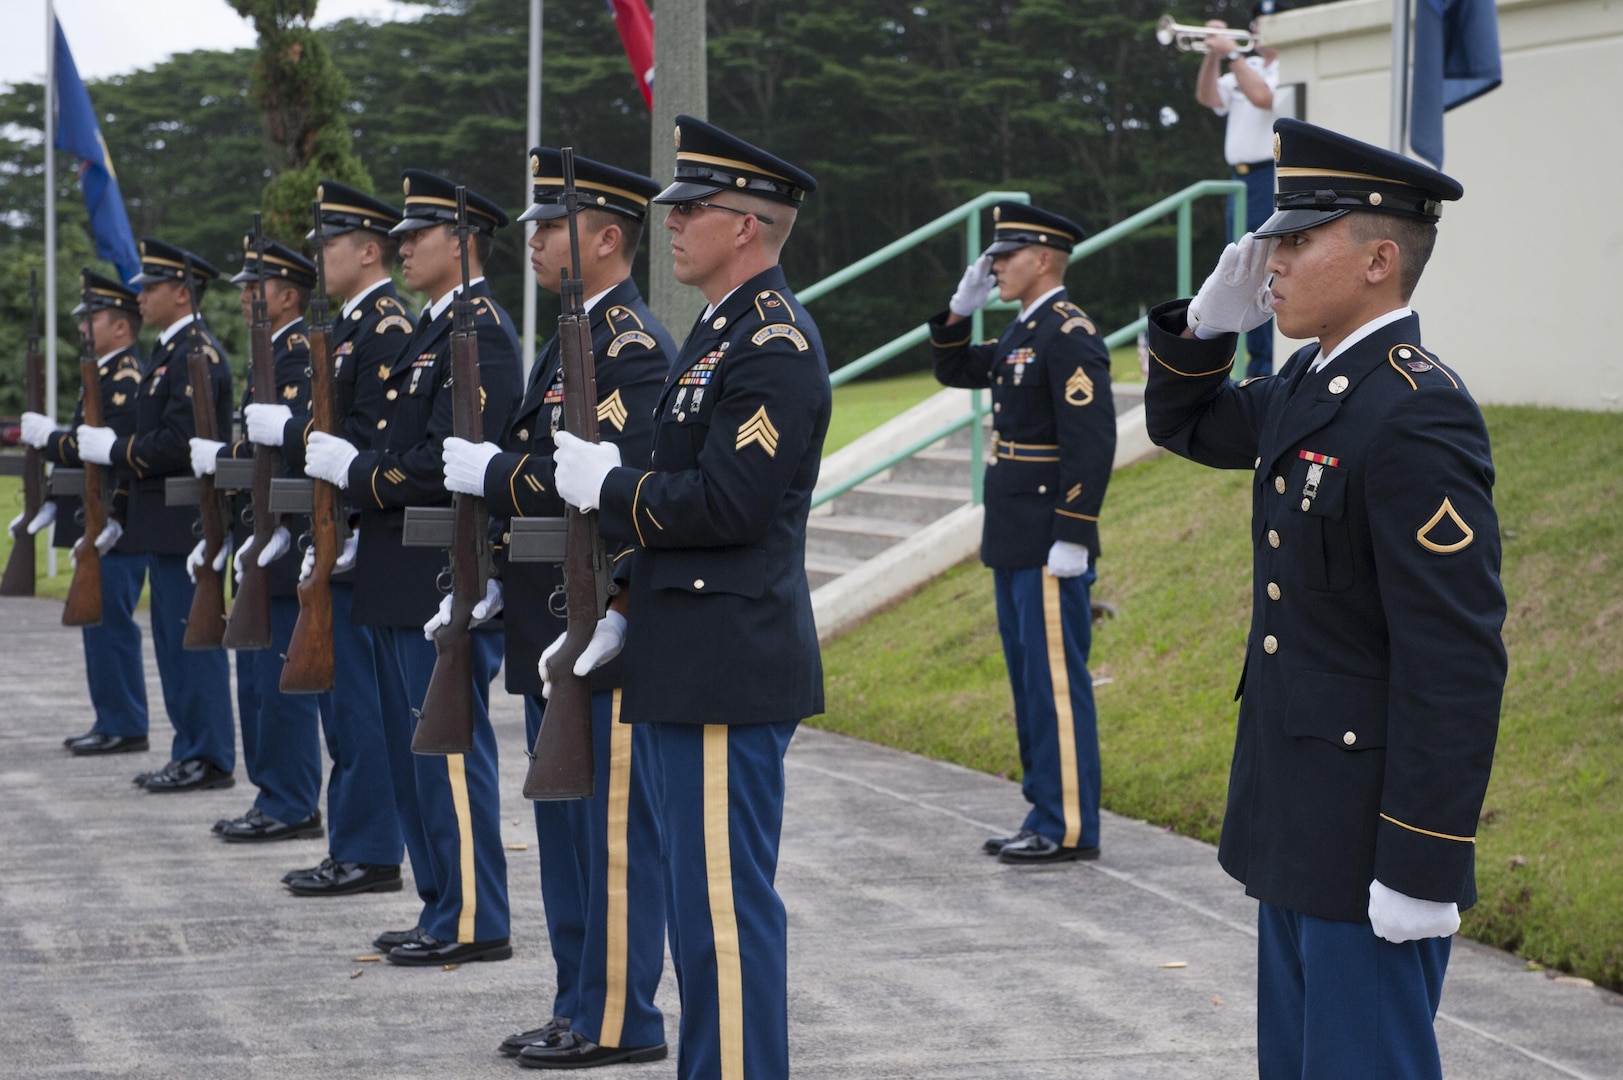 Honor Guard members of the Hawaii Air National Guard perform a rifle salute during the 2015 Governor’s Veterans Day Ceremony at the Hawaii State Veterans Cemetery Nov. 11, in Kaneohe, Hawaii. U.S. Army Maj. Gen. Arthur J. Logan, the adjutant general of the state of Hawaii, and Shan Tsutsui, lieutenant governor of Hawaii, provided welcoming remarks and a keynote speech during the ceremony. (U.S. Air Force photo by Staff Sgt. Christopher Hubenthal)